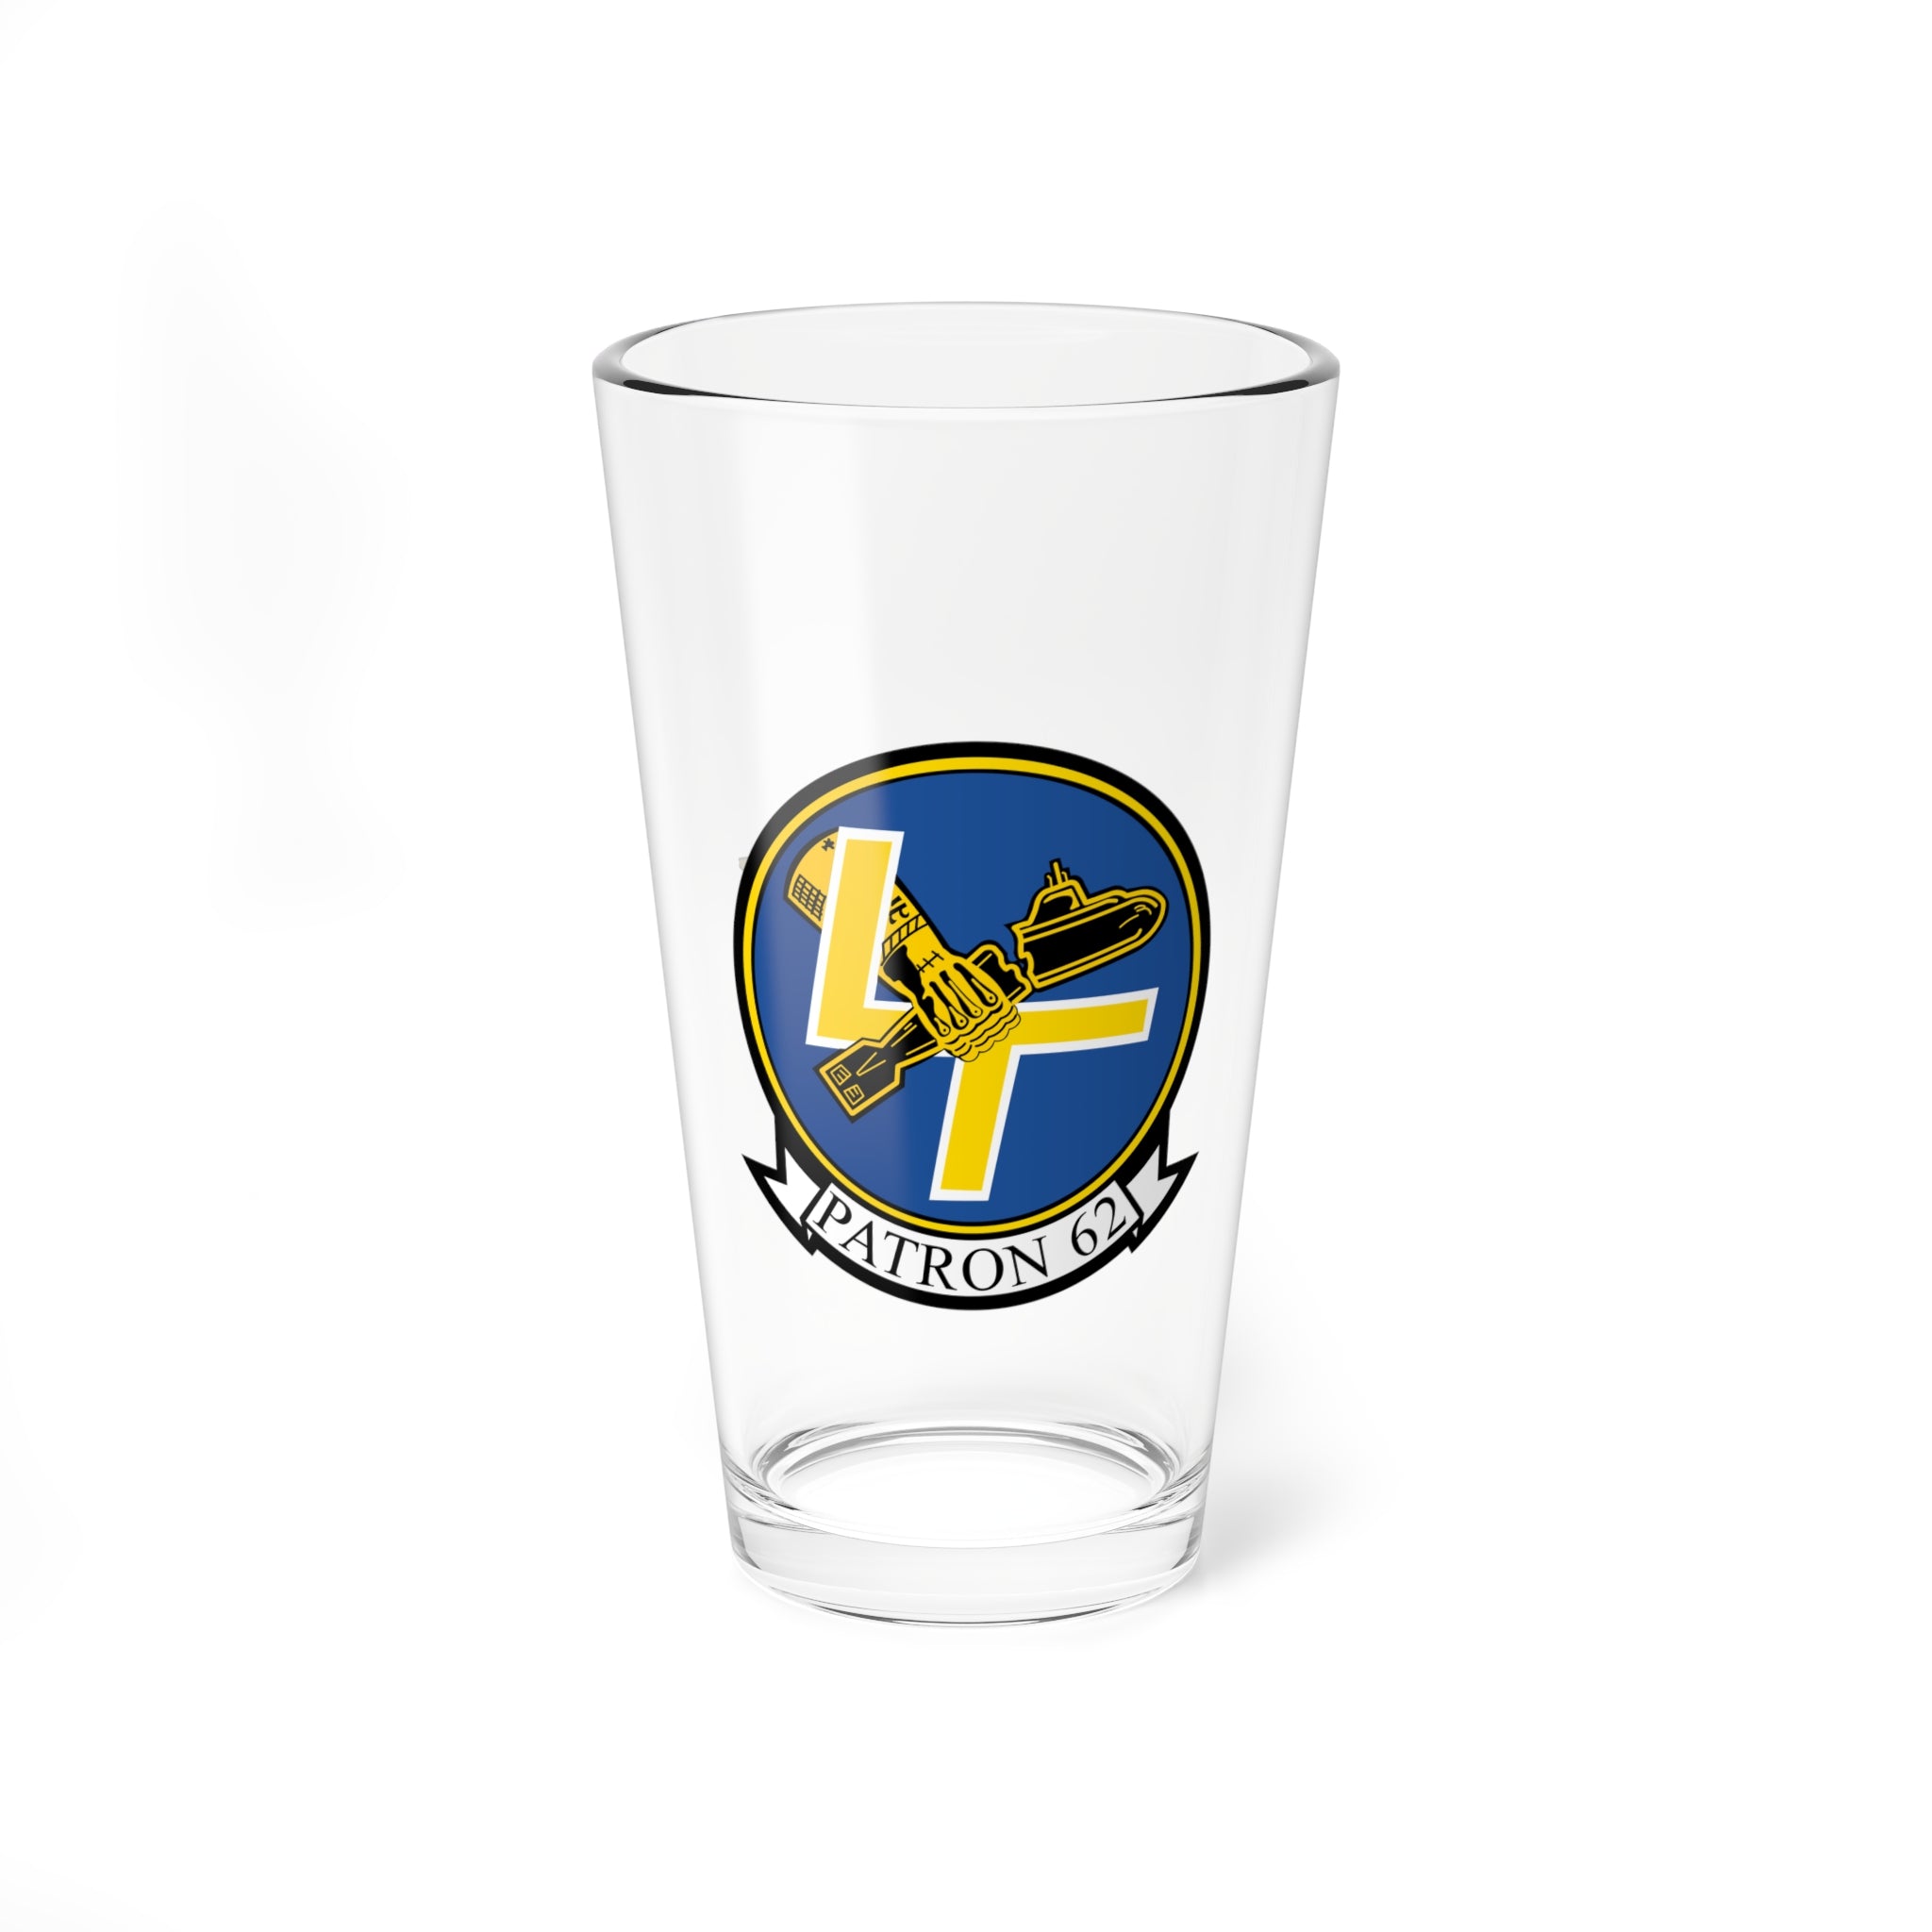 Personalized VP-62 "Broadarrows" NFO Wings Pint Glass, Navy Maritime Patrol Squadron flying the P-3 Orion - Shop Hippysgoodness